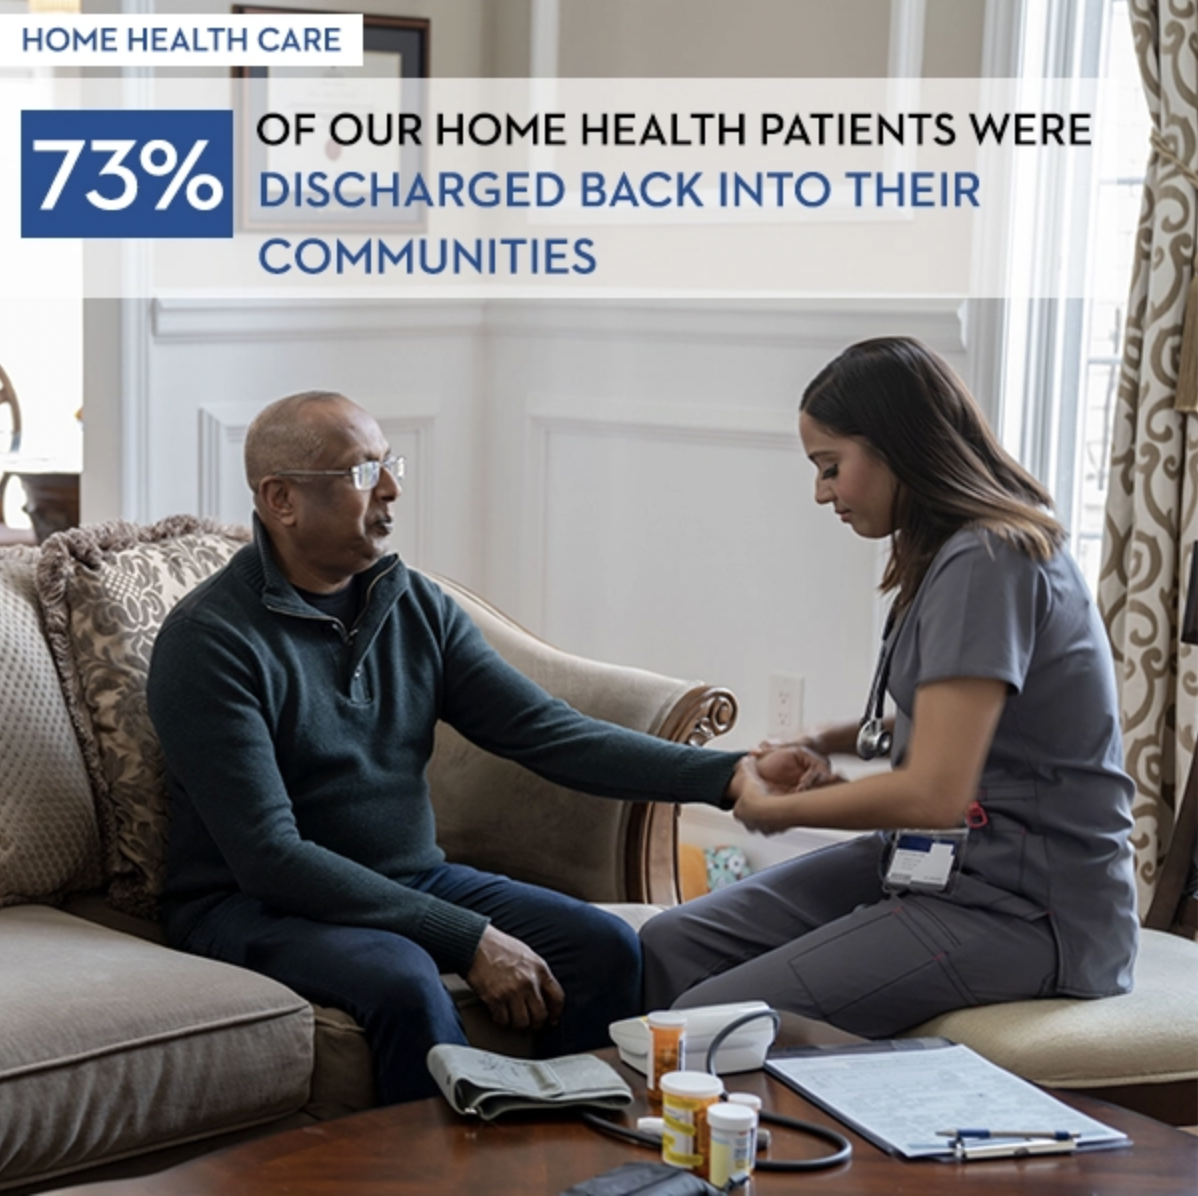 Home Health Care - 73% of our home health patients were discharged back into their communities